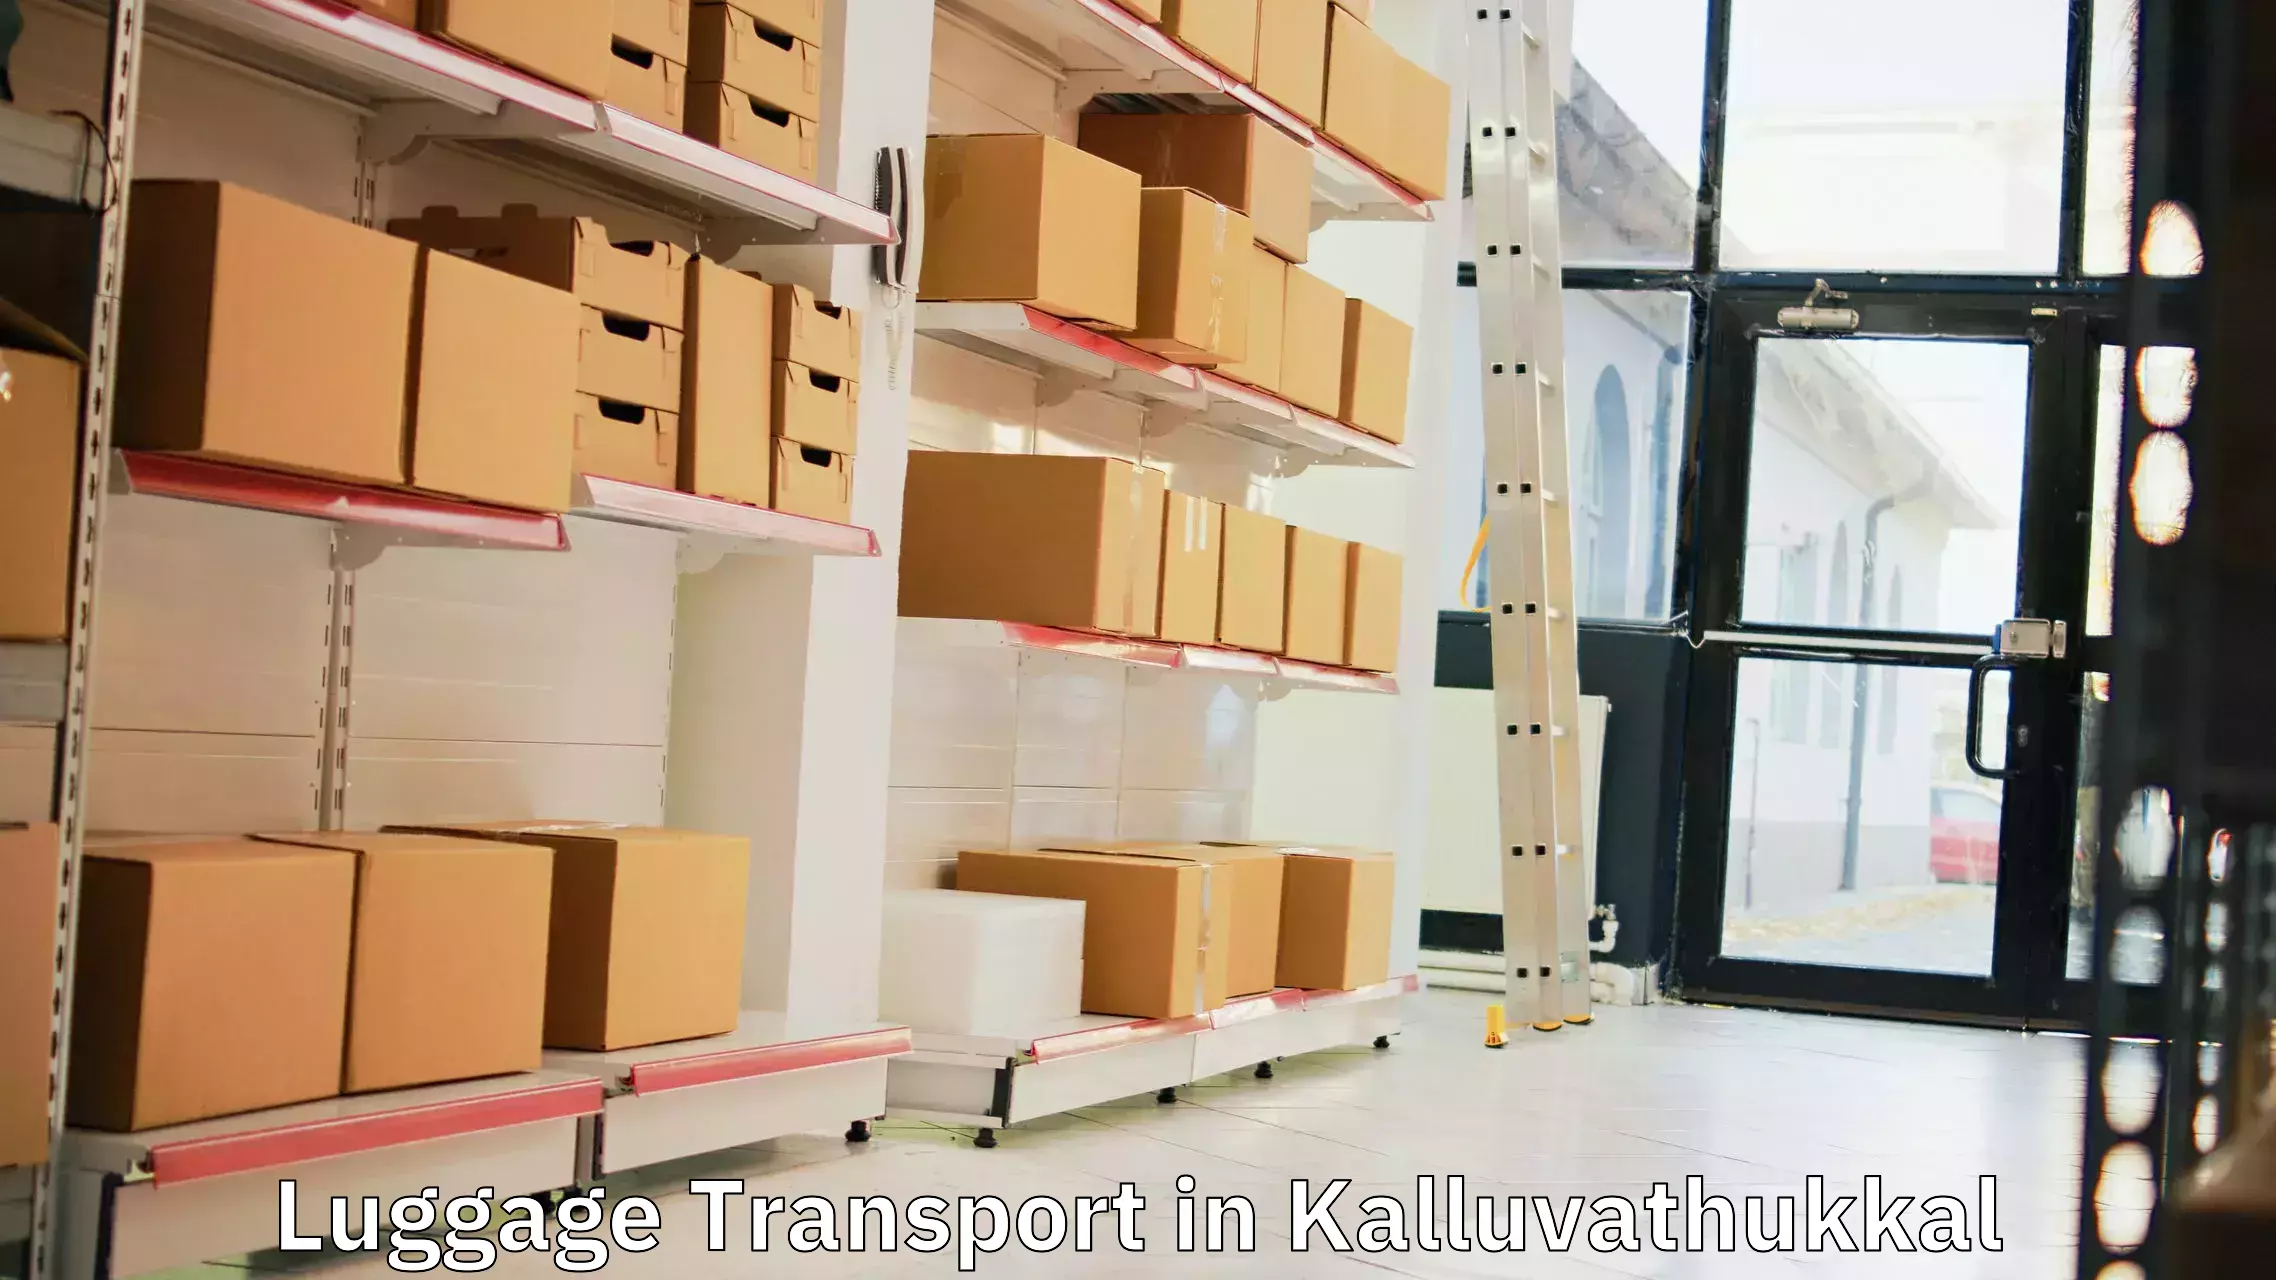 Luggage delivery operations in Kalluvathukkal